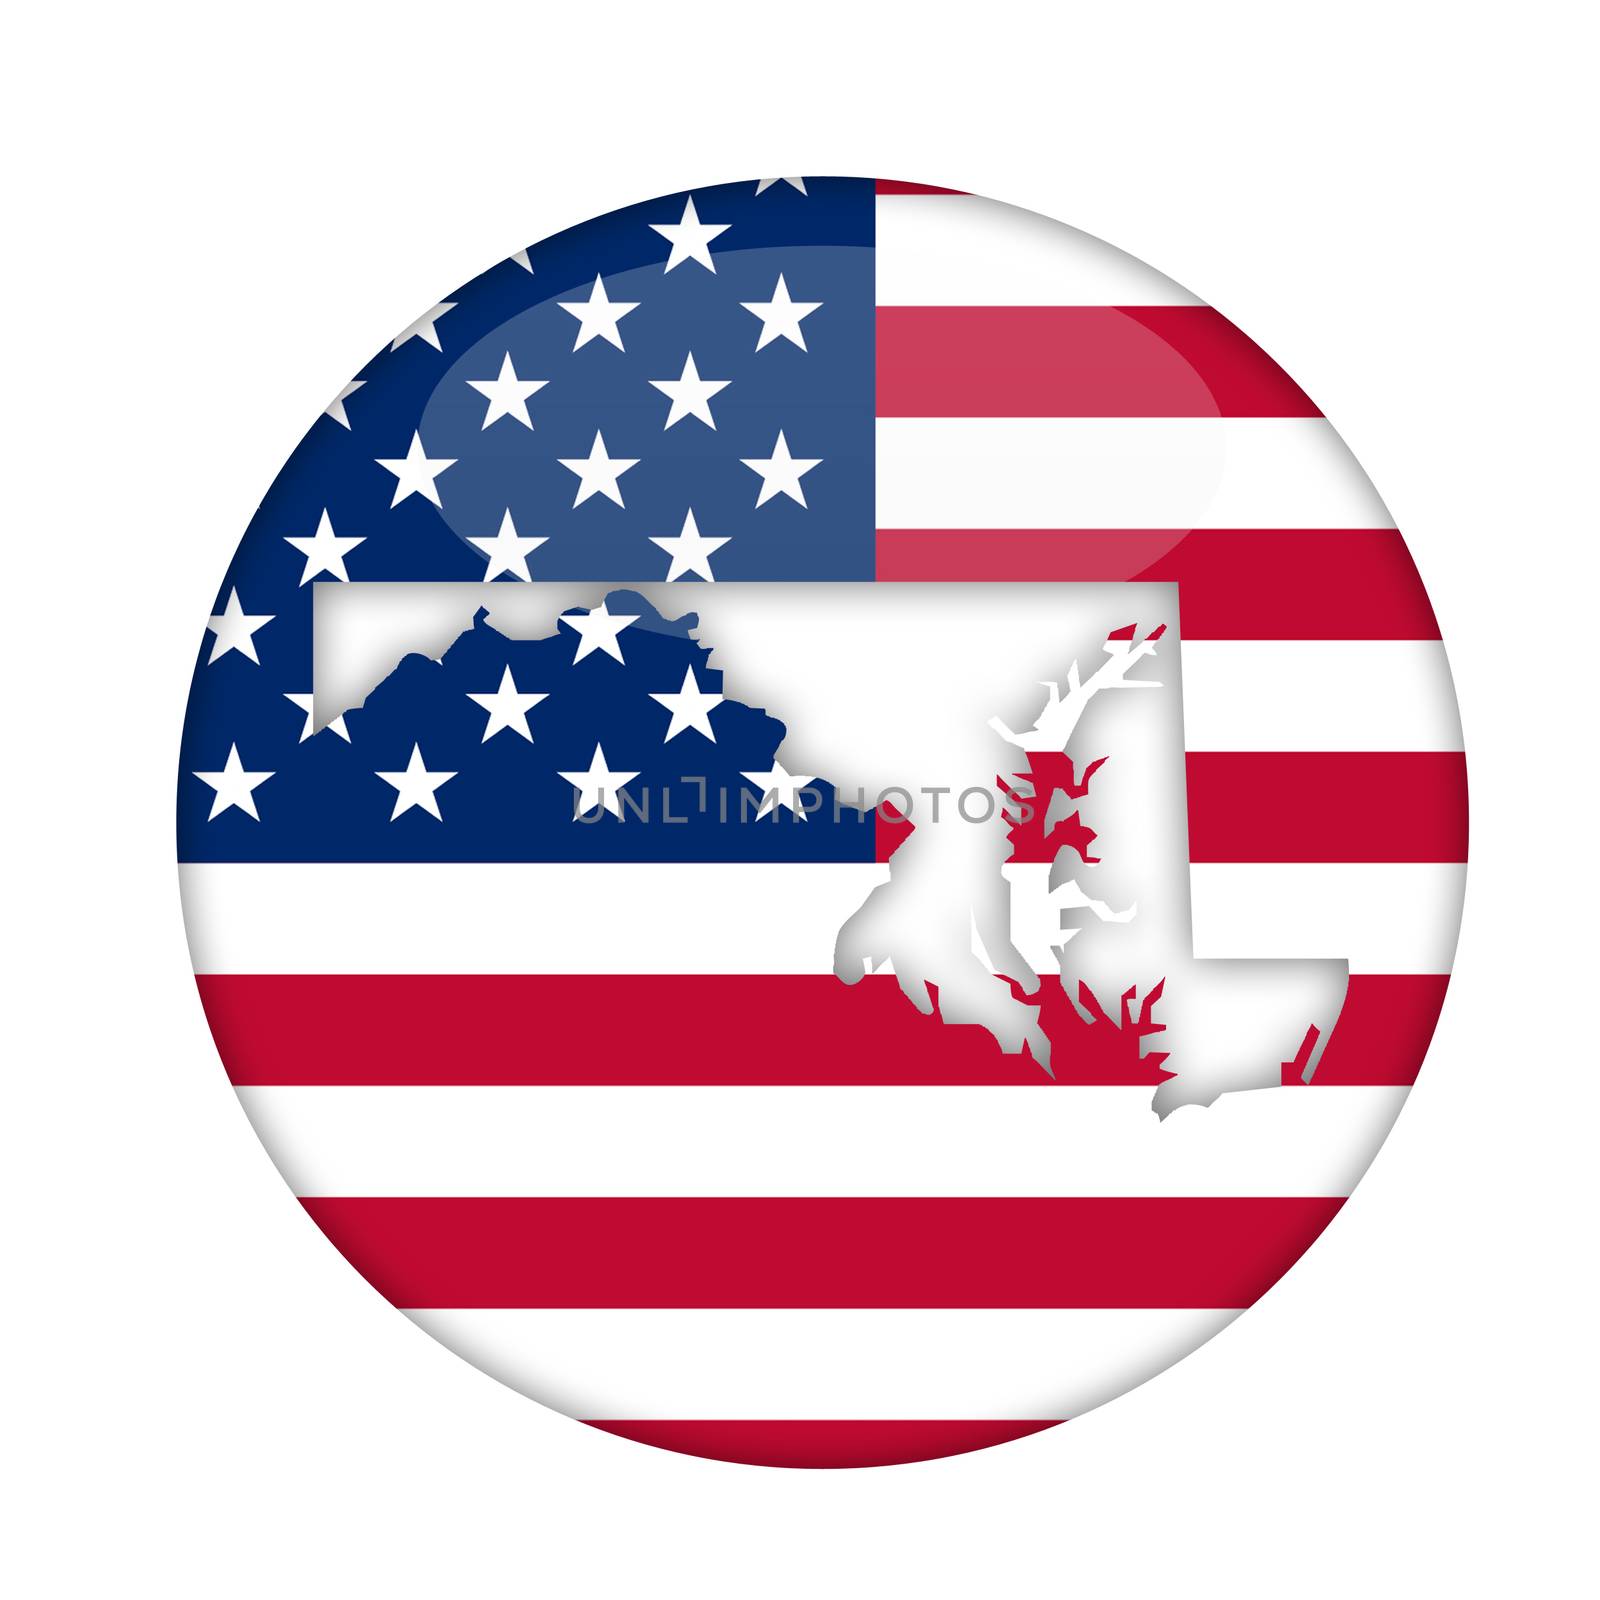 Maryland state of America badge isolated on a white background.